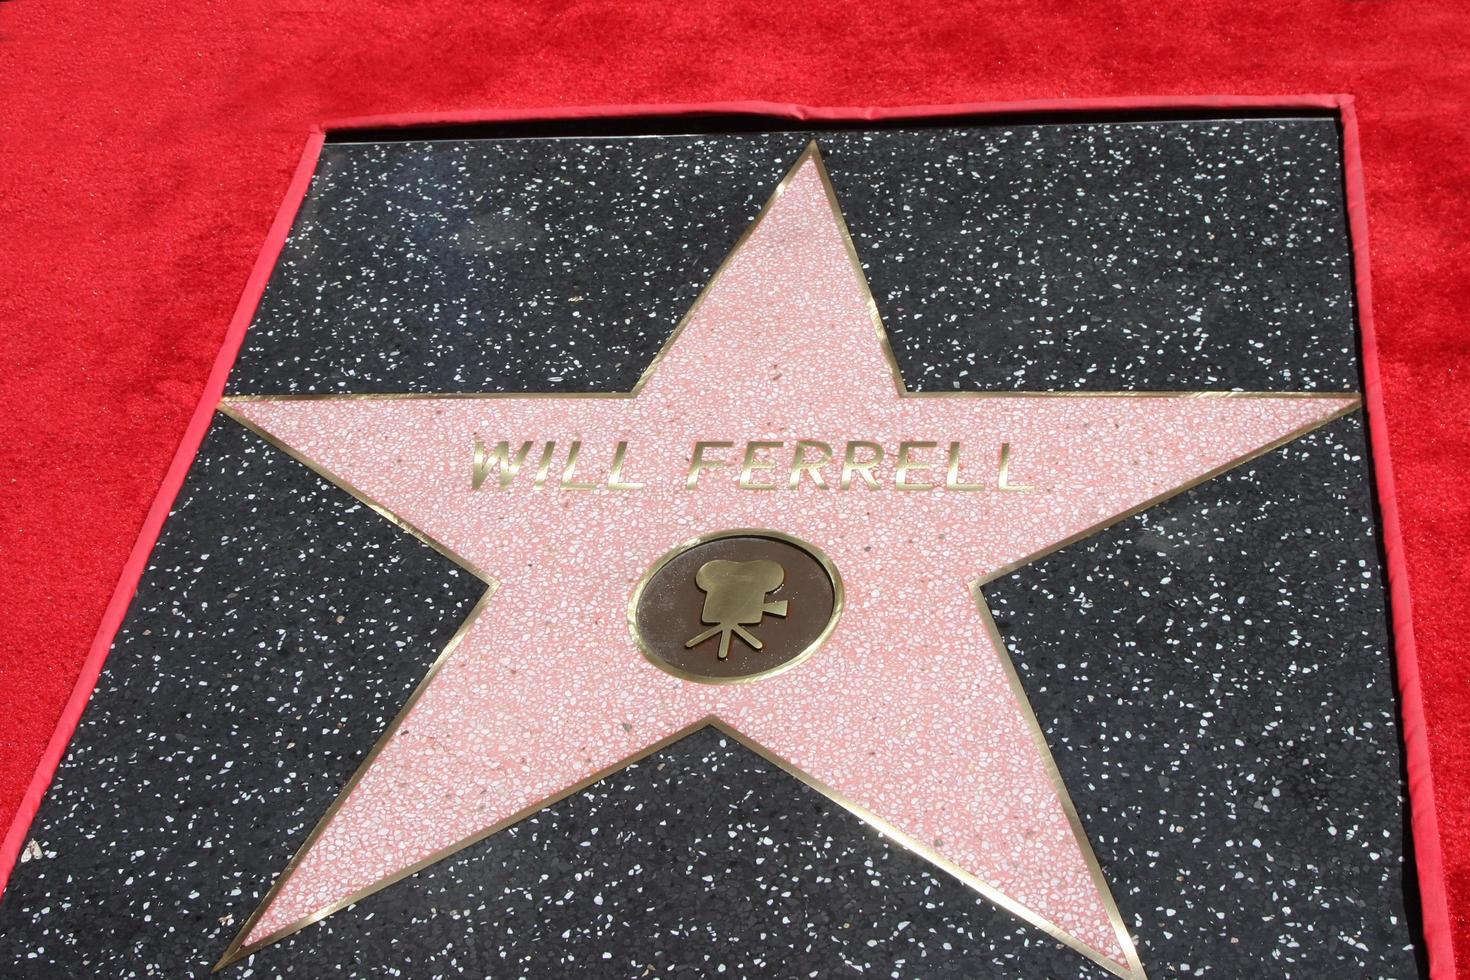 LOS ANGELES, MAR 24 - Will Ferrell s Star at the Will Ferrell Hollywood Walk of Fame Star Ceremony at the Hollywood Boulevard on March 24, 2015 in Los Angeles, CA photo